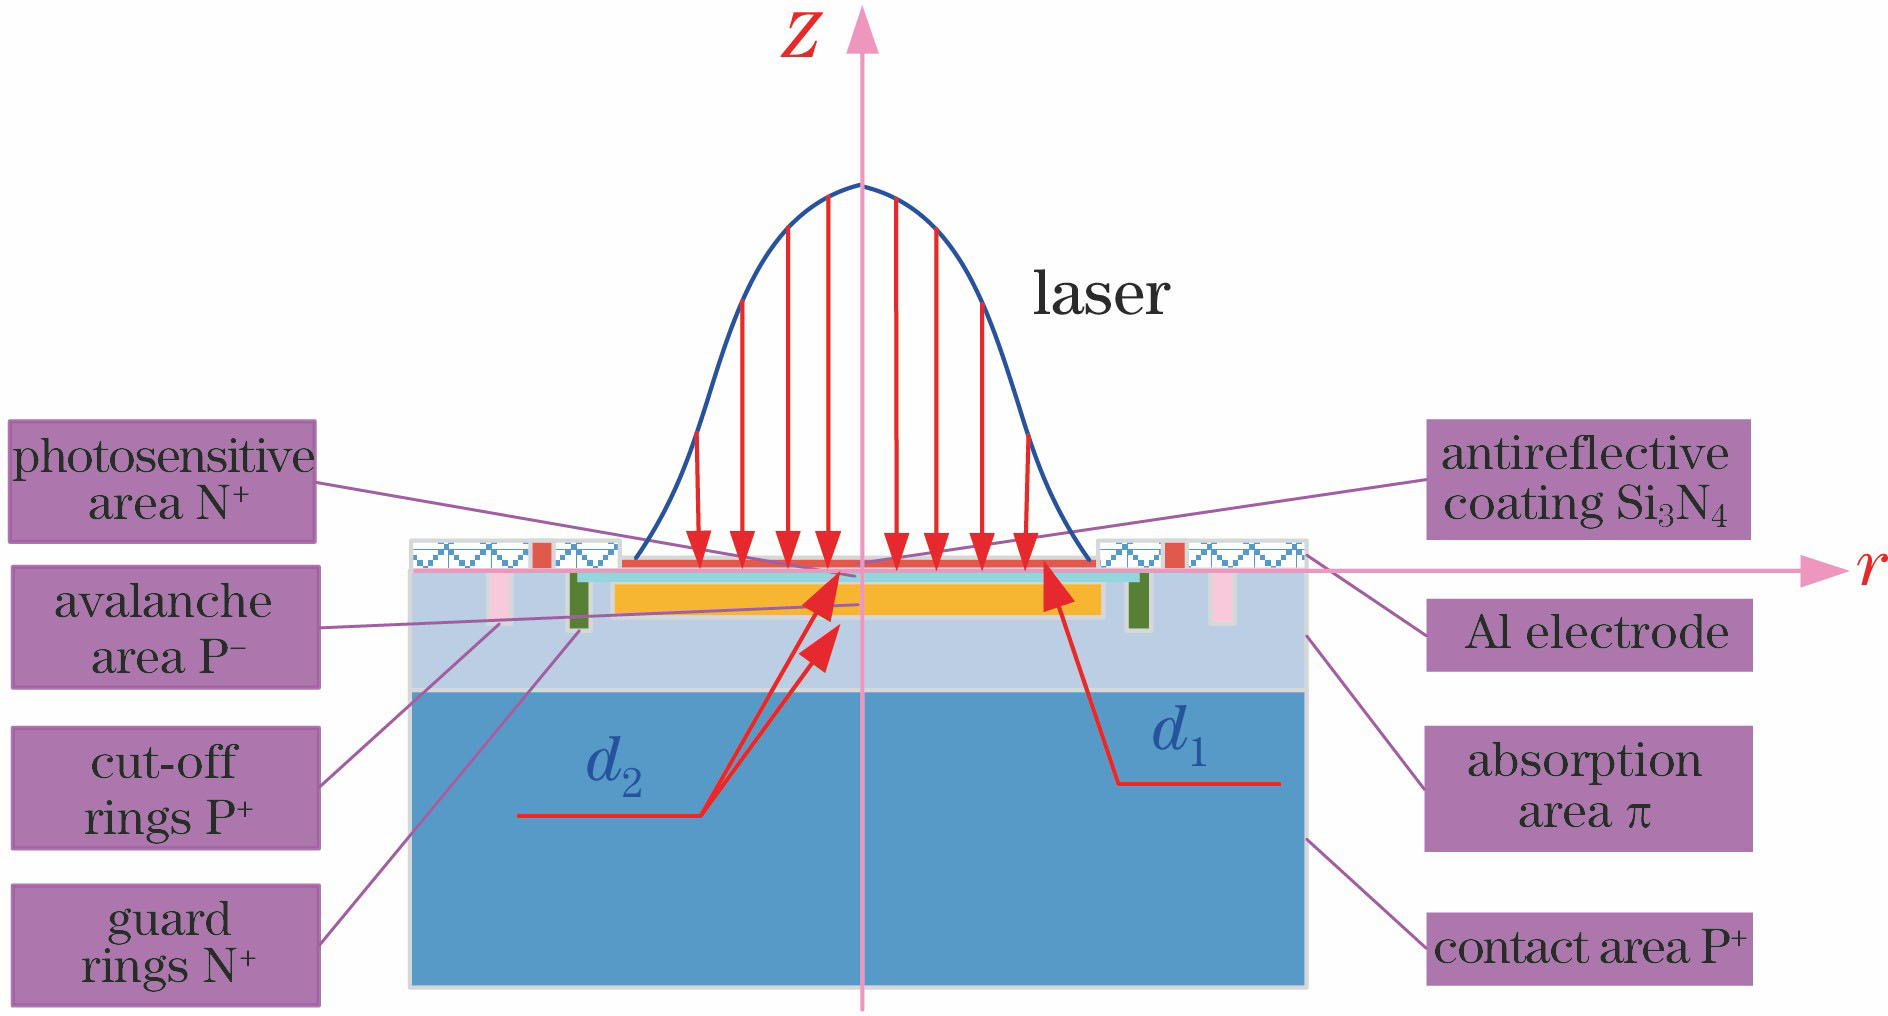 Theoretical model of Si-APD irradiated by long-pulse laser